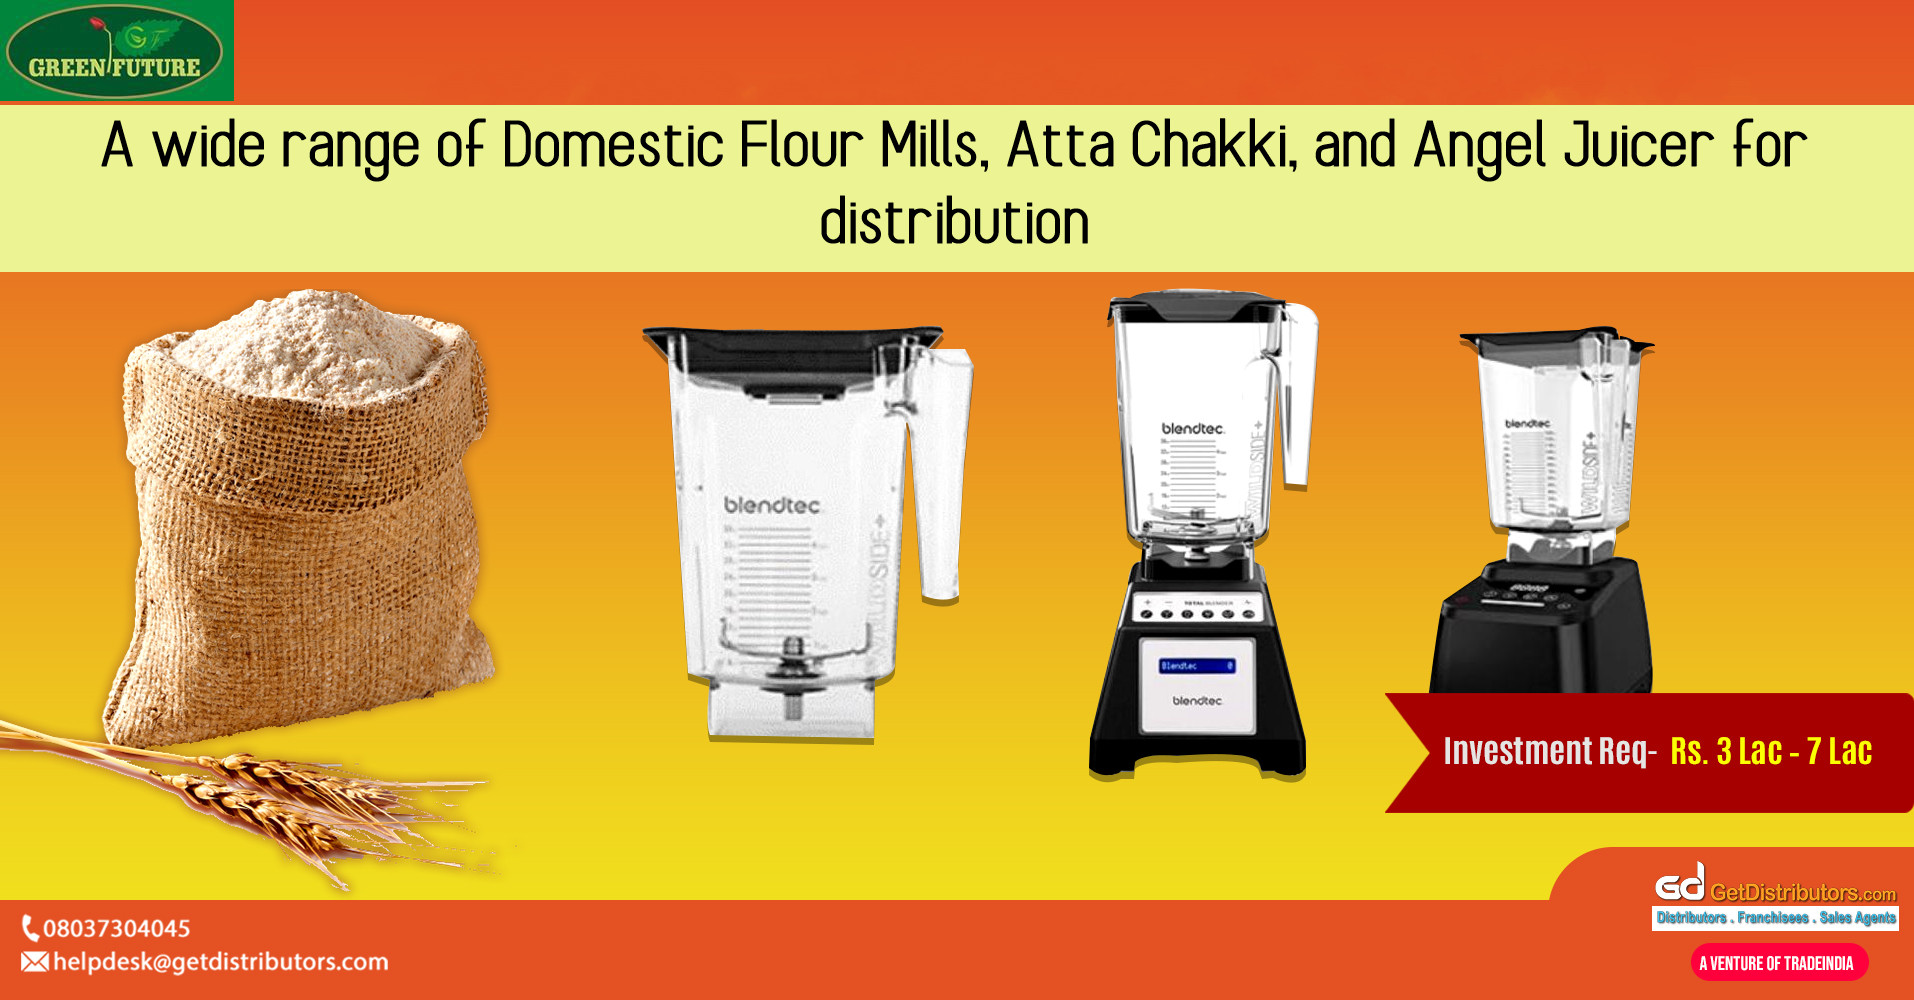 A wide range of Domestic Flour Mills, Atta Chakki, and Angel Juicer for distribution